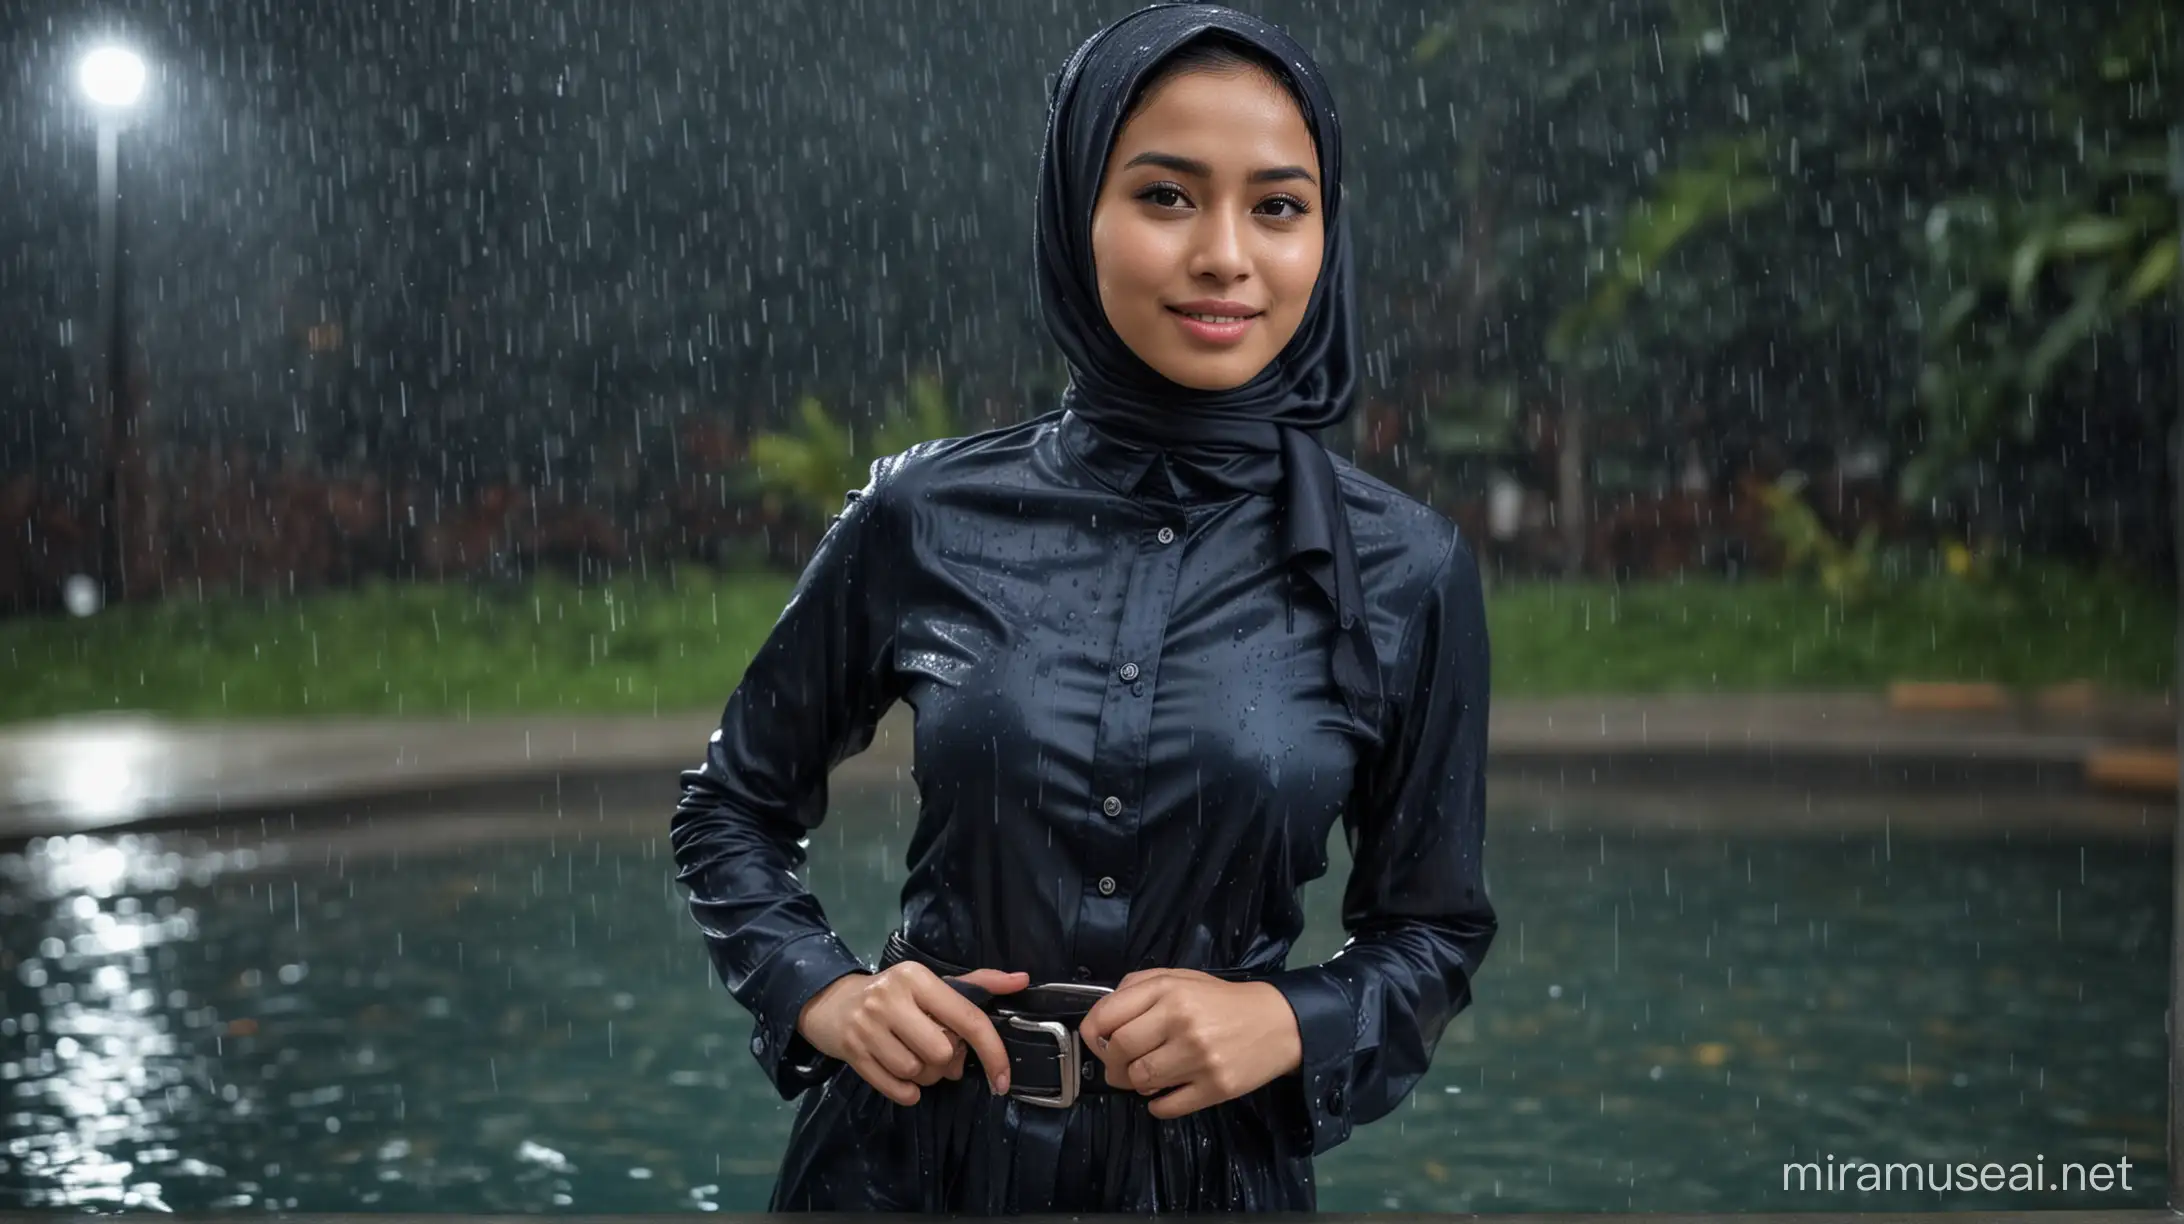 25 years old woman, indonesian, hijab, tight fit long sleeves buttoned navy-blue satin shirt, black long pants with belt, heavy downpour rain, swimming fully clothed, dripping wet, get wet, poolside, smirk, at night, low light, close-up portrait